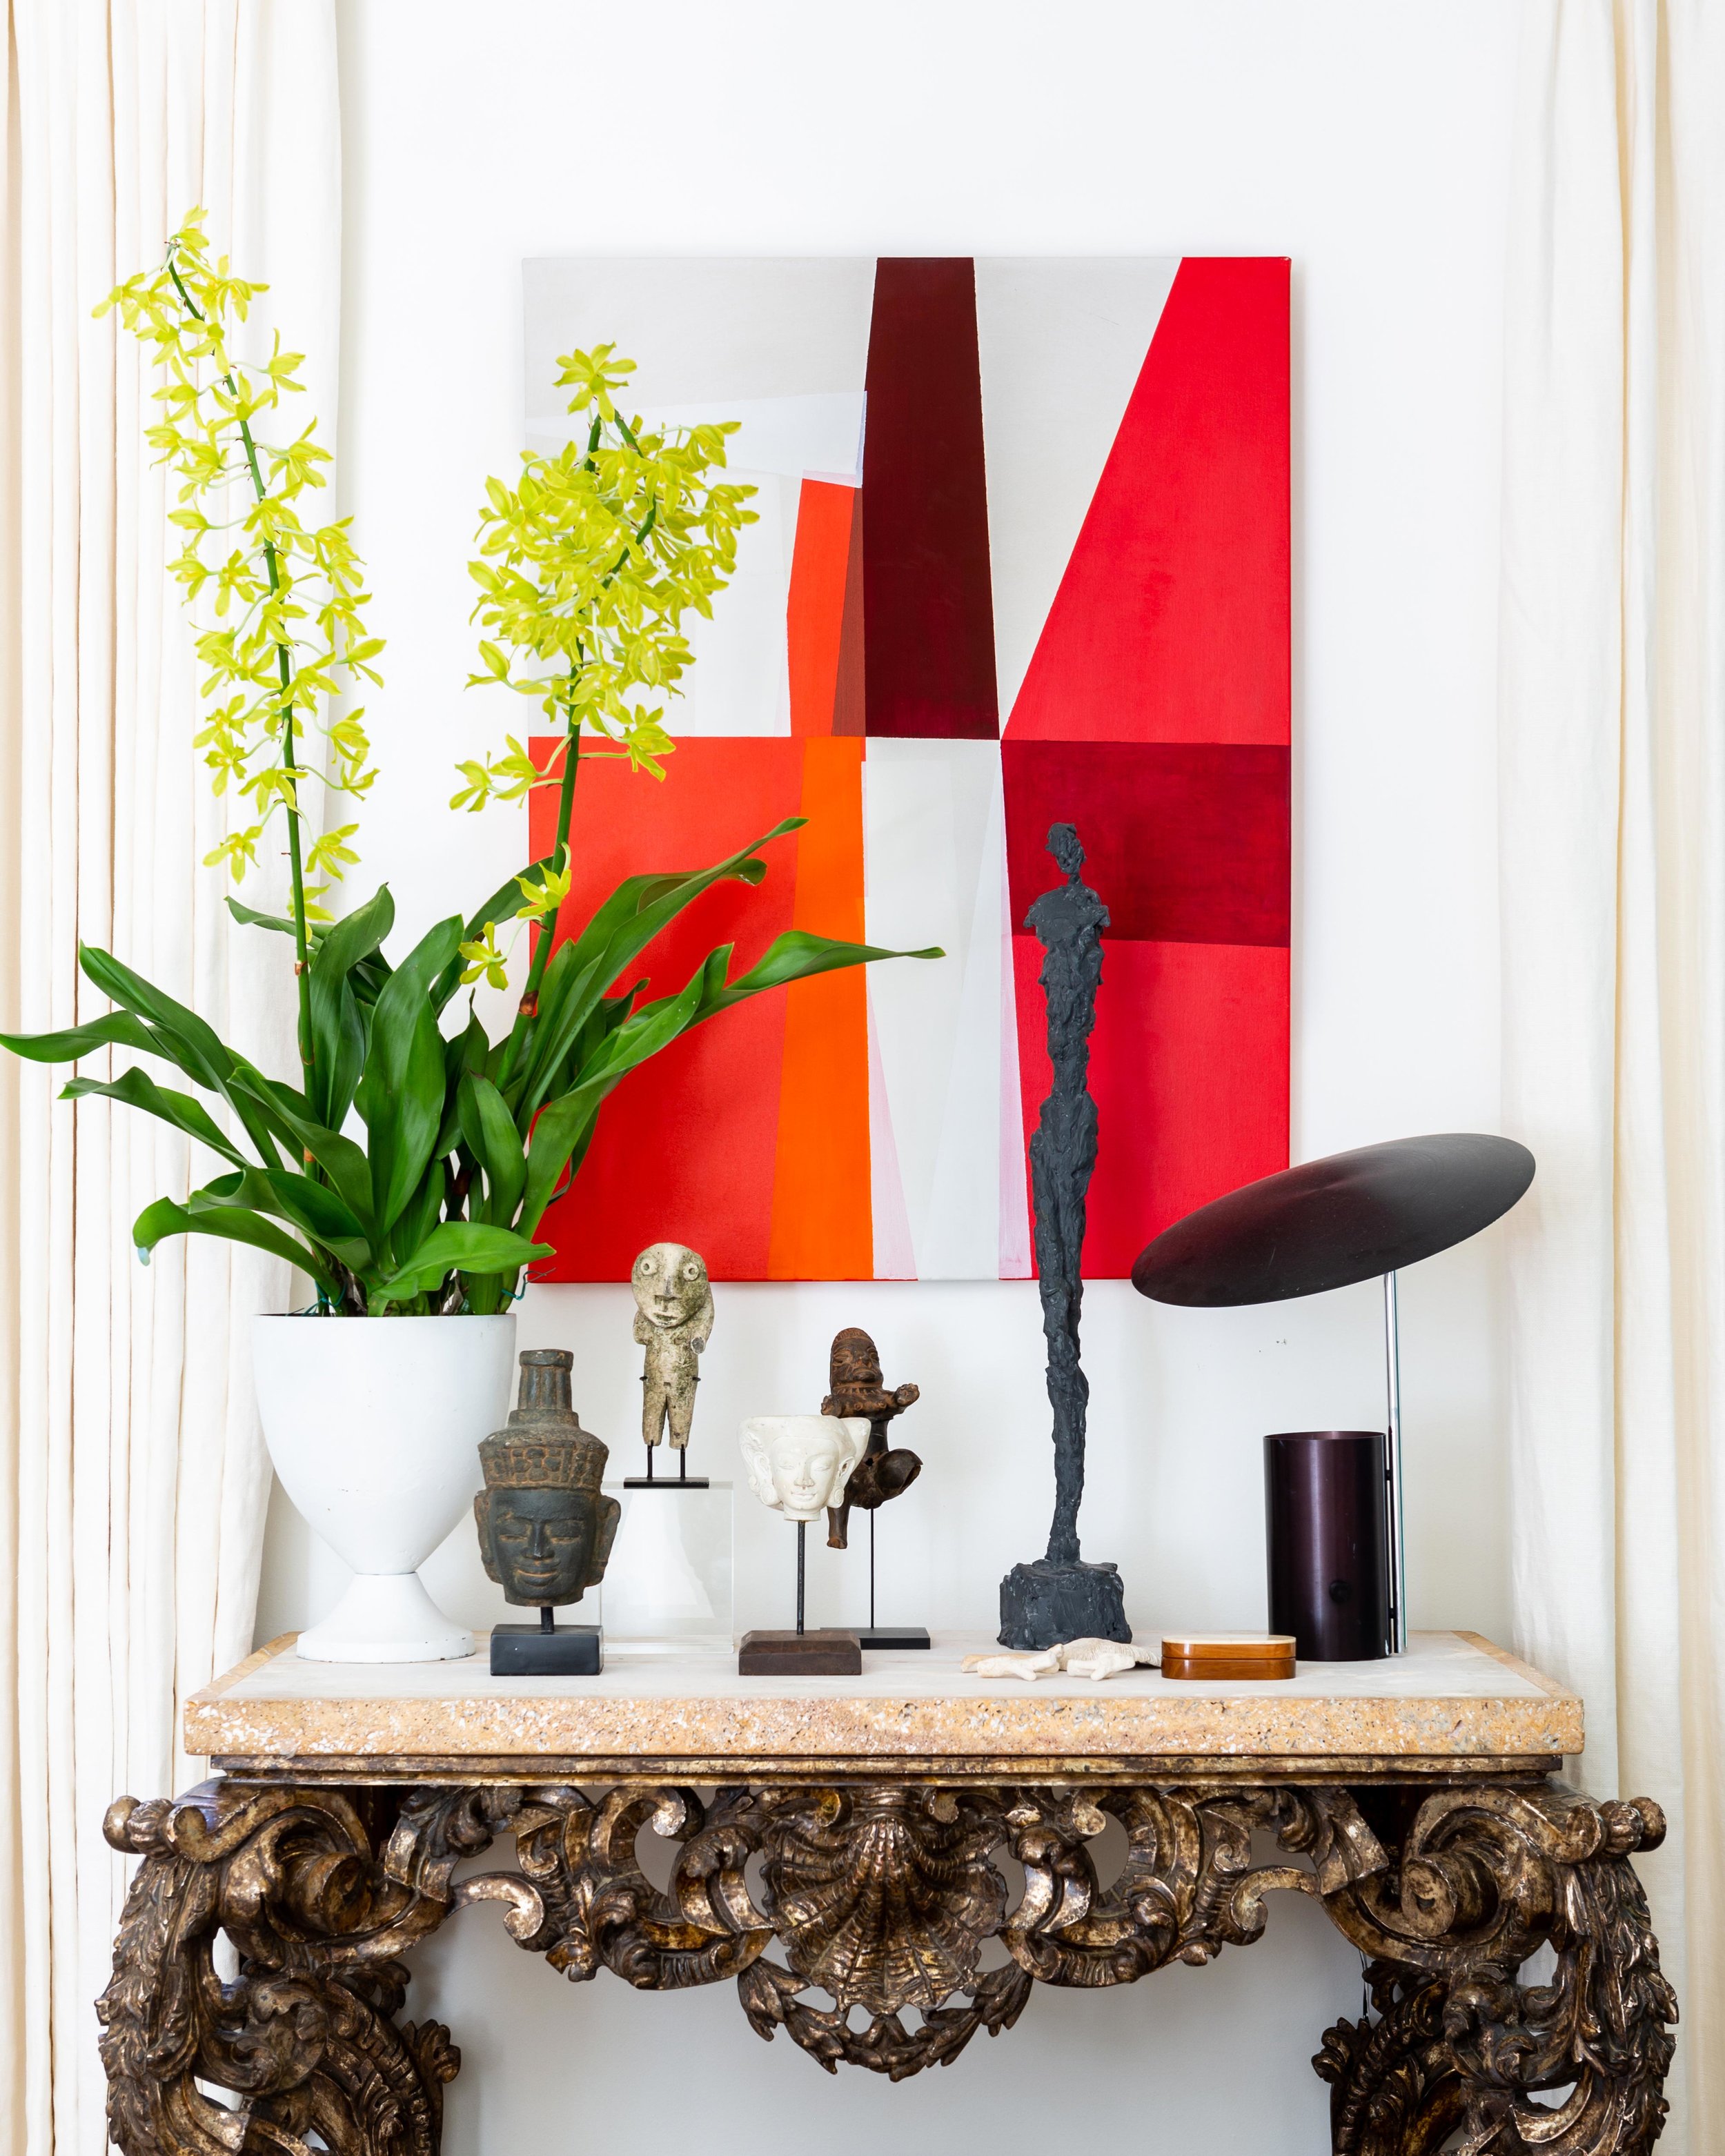 As a birthday present to himself, McLure bought this antique console from Interiors Market in Atlanta. A piece of abstract art by Catherine Booker Jones is displayed above it.